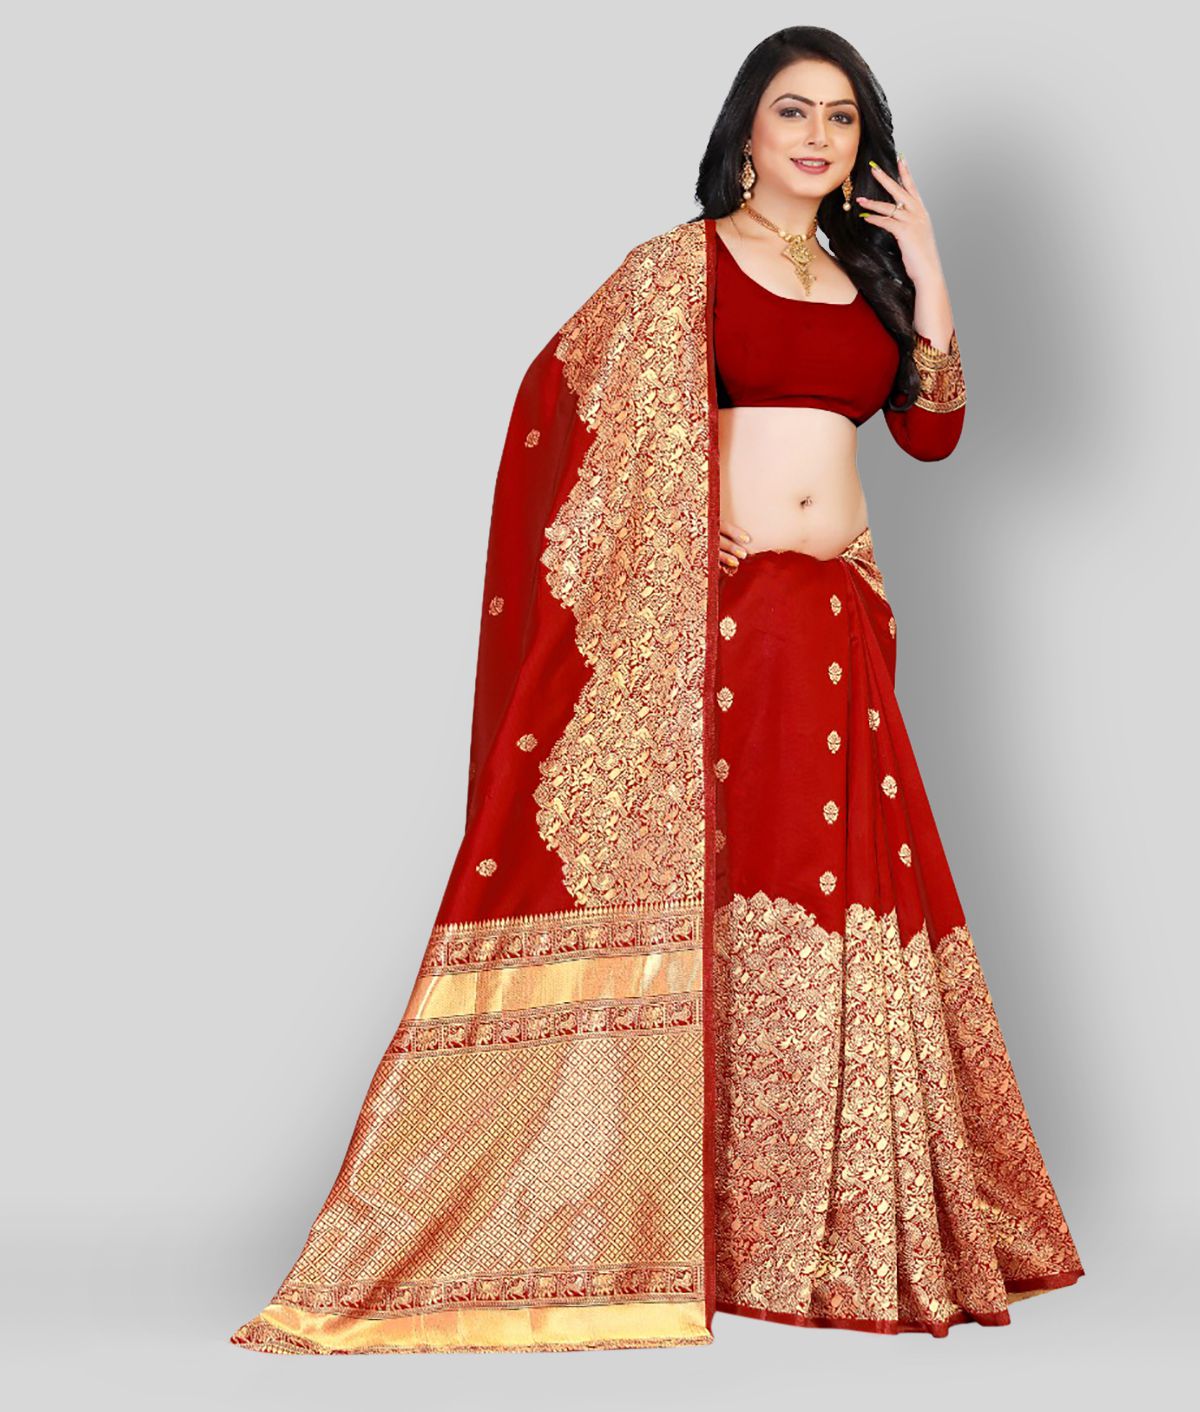     			NENCY FASHIONS - Red Banarasi Silk Saree With Blouse Piece (Pack of 1)